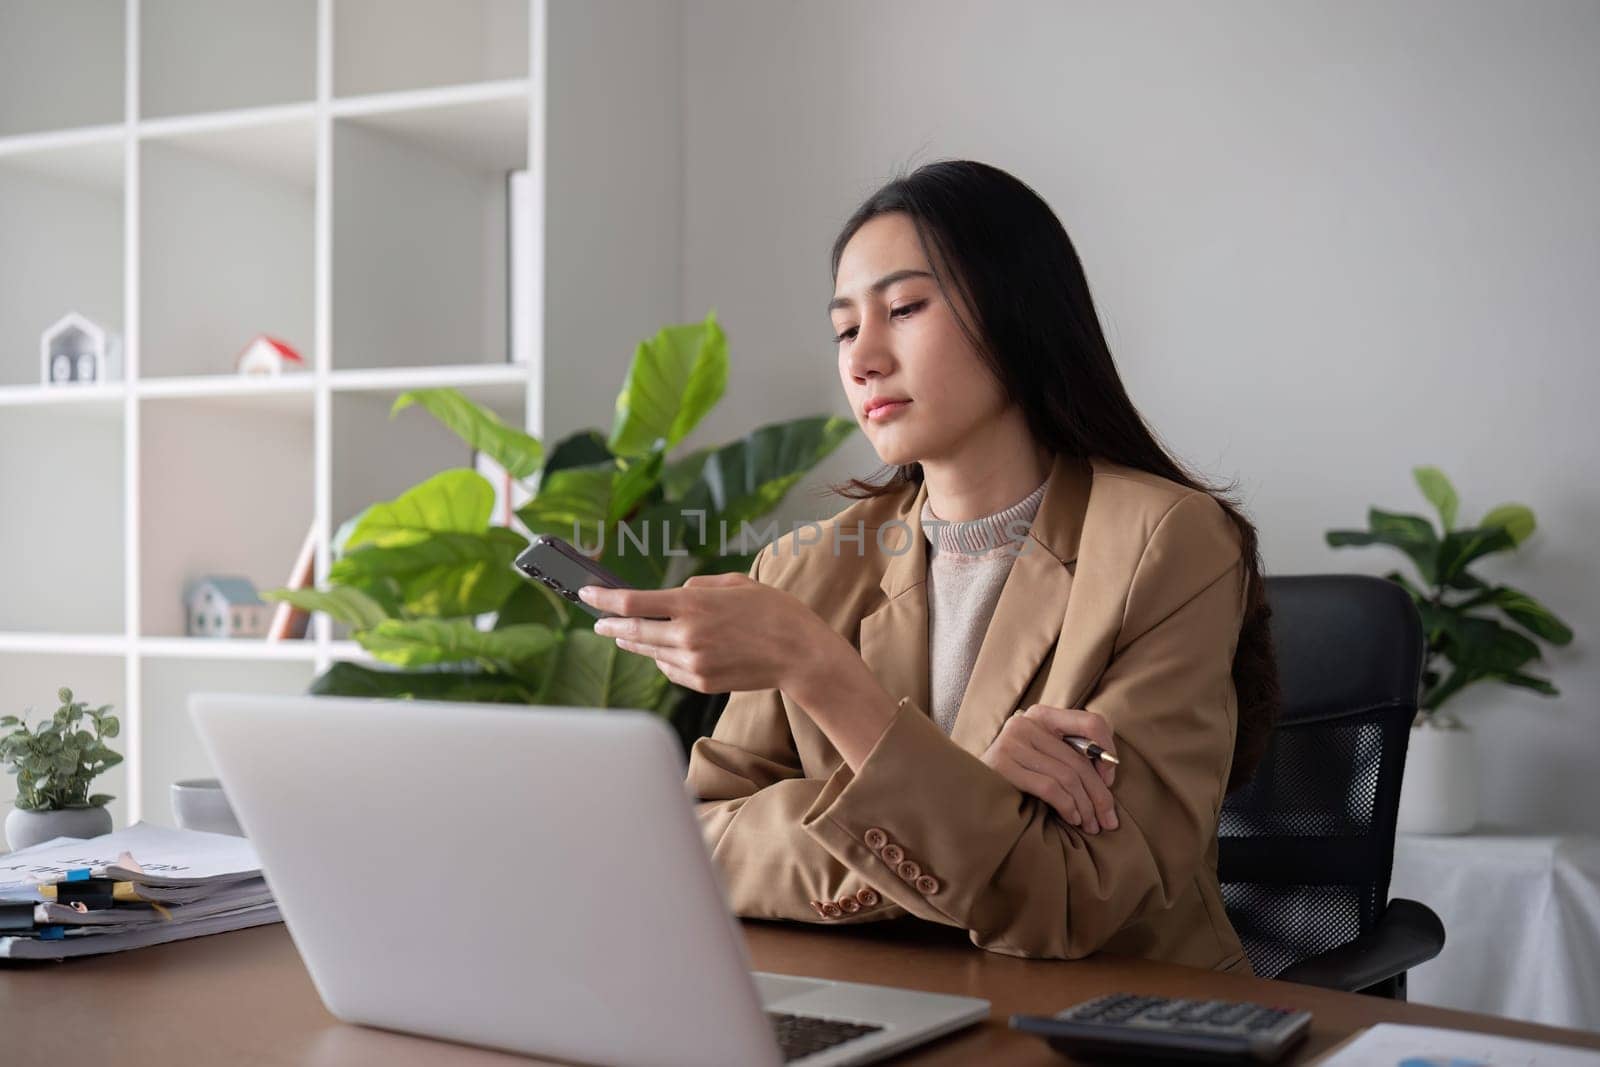 Unhappy Asian business woman shows stress over unsuccessful business while working in home office decorated with soothing green plants. by wichayada